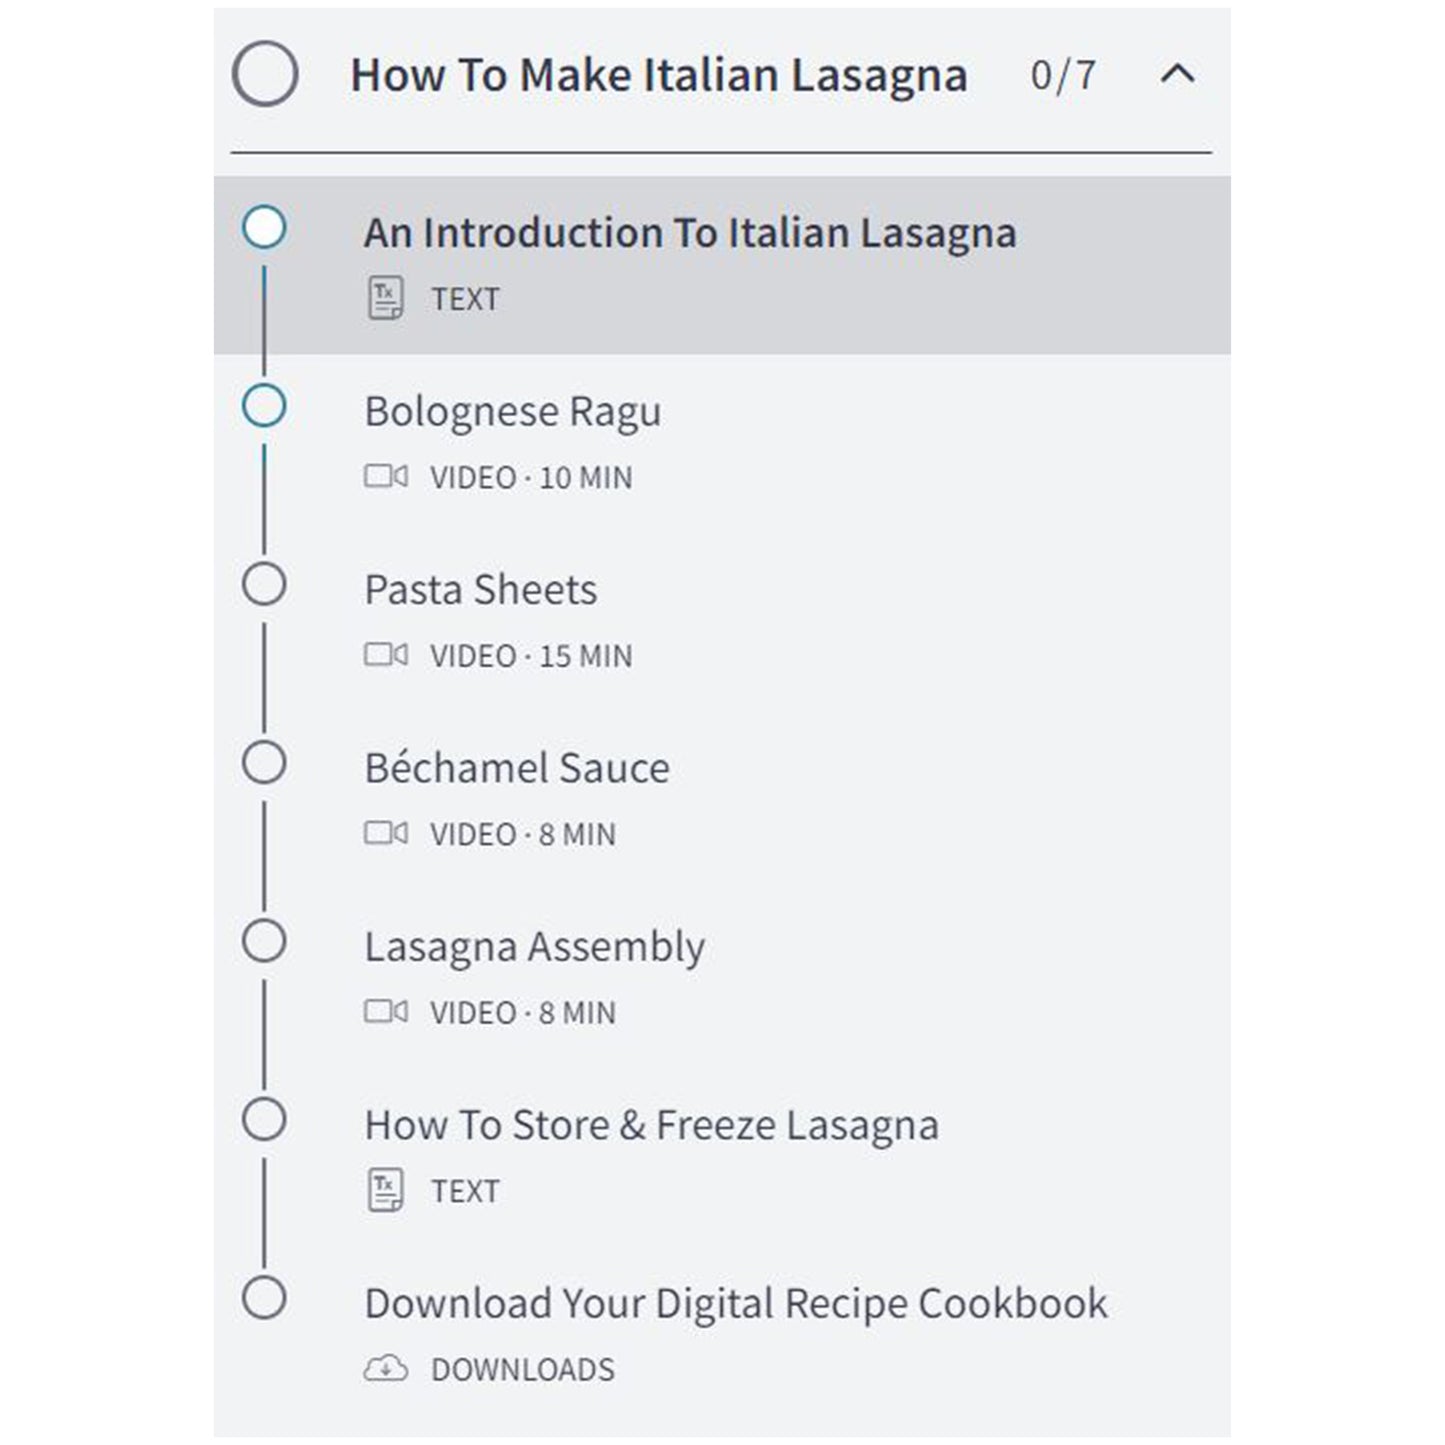 All lessons in the Authentic Italian Lasagna course.